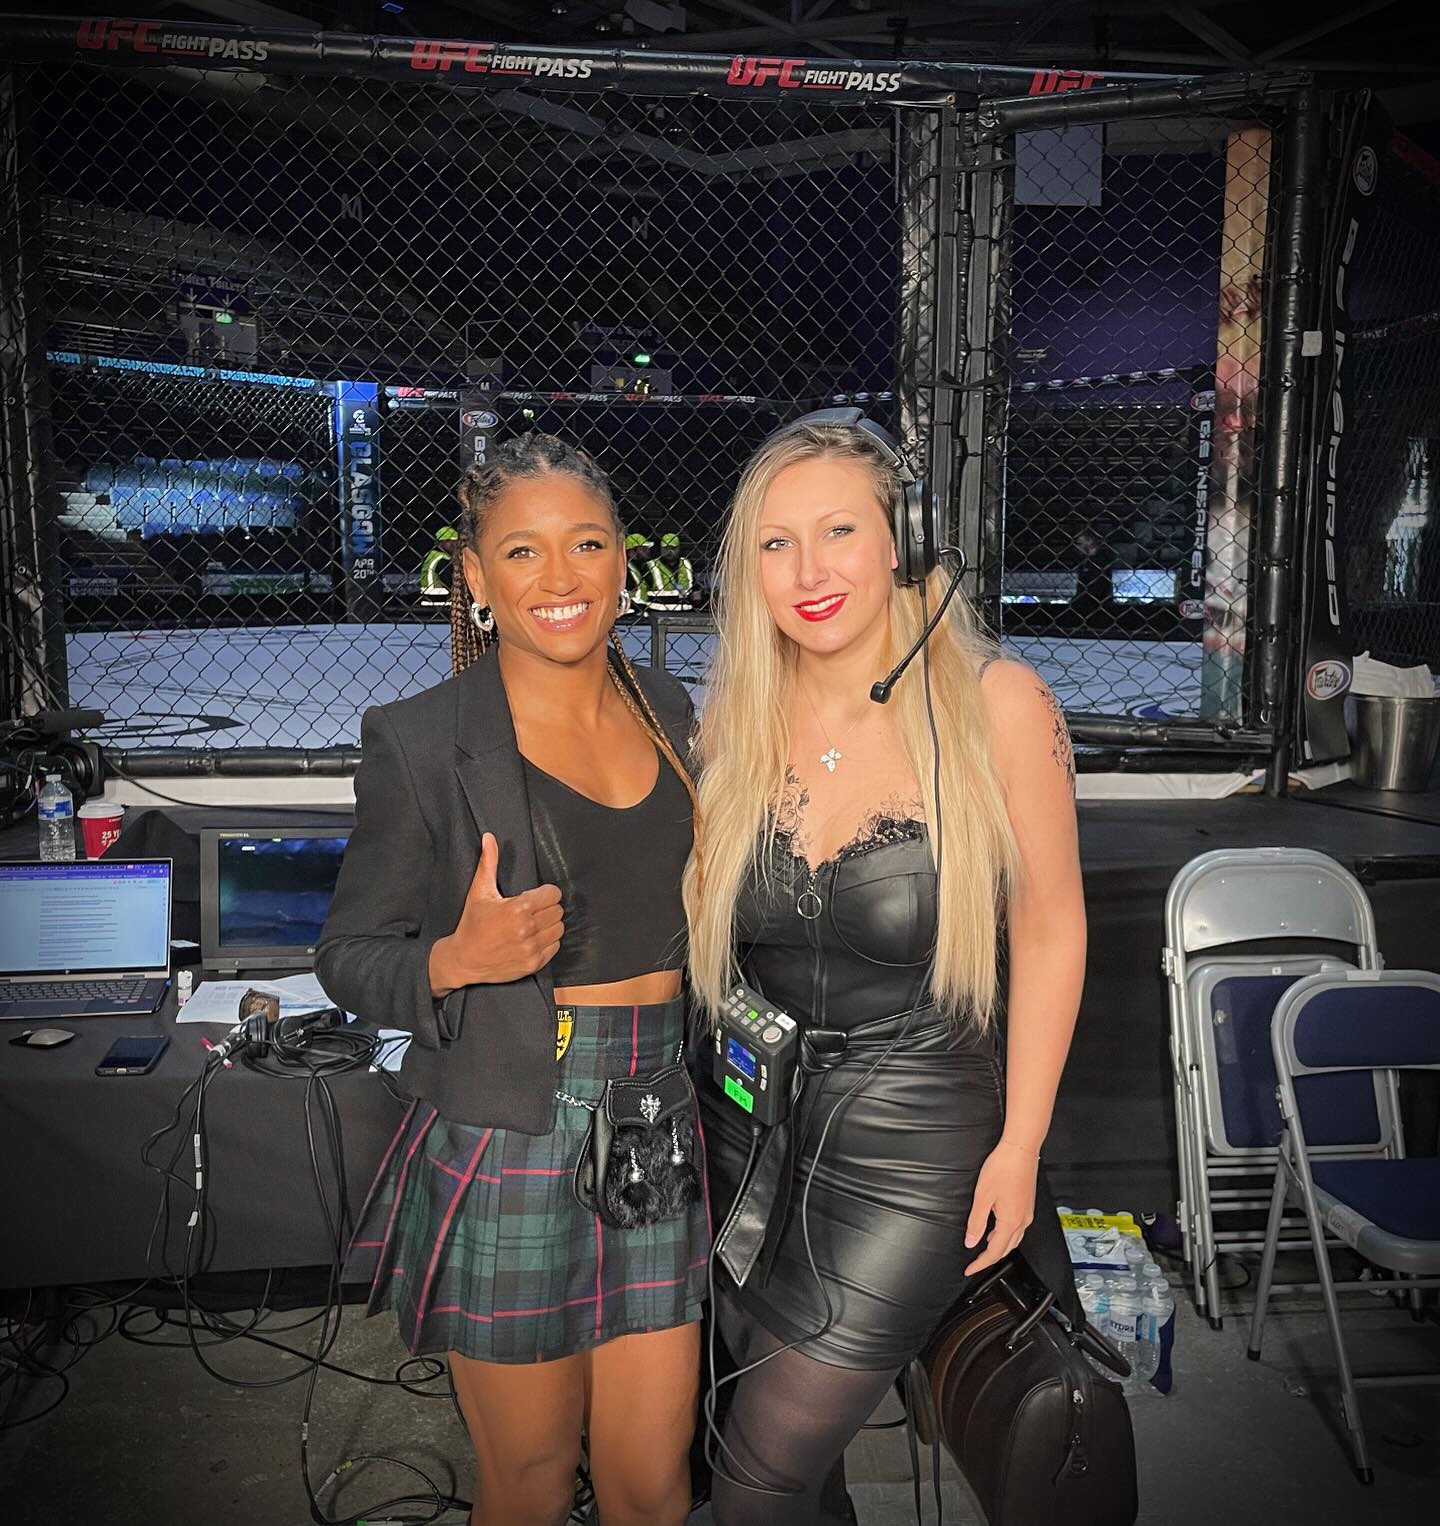 Such an honour to be in the company of a true champion @angieoverkill 🥇🌟🥊 Beyond her impressive fighting skills, she’s an incredible role-model, always inspiring and uplifting those around her! ✨ Thank you for making this possible @cagewarriors 🙏 #mma #ufc #champion